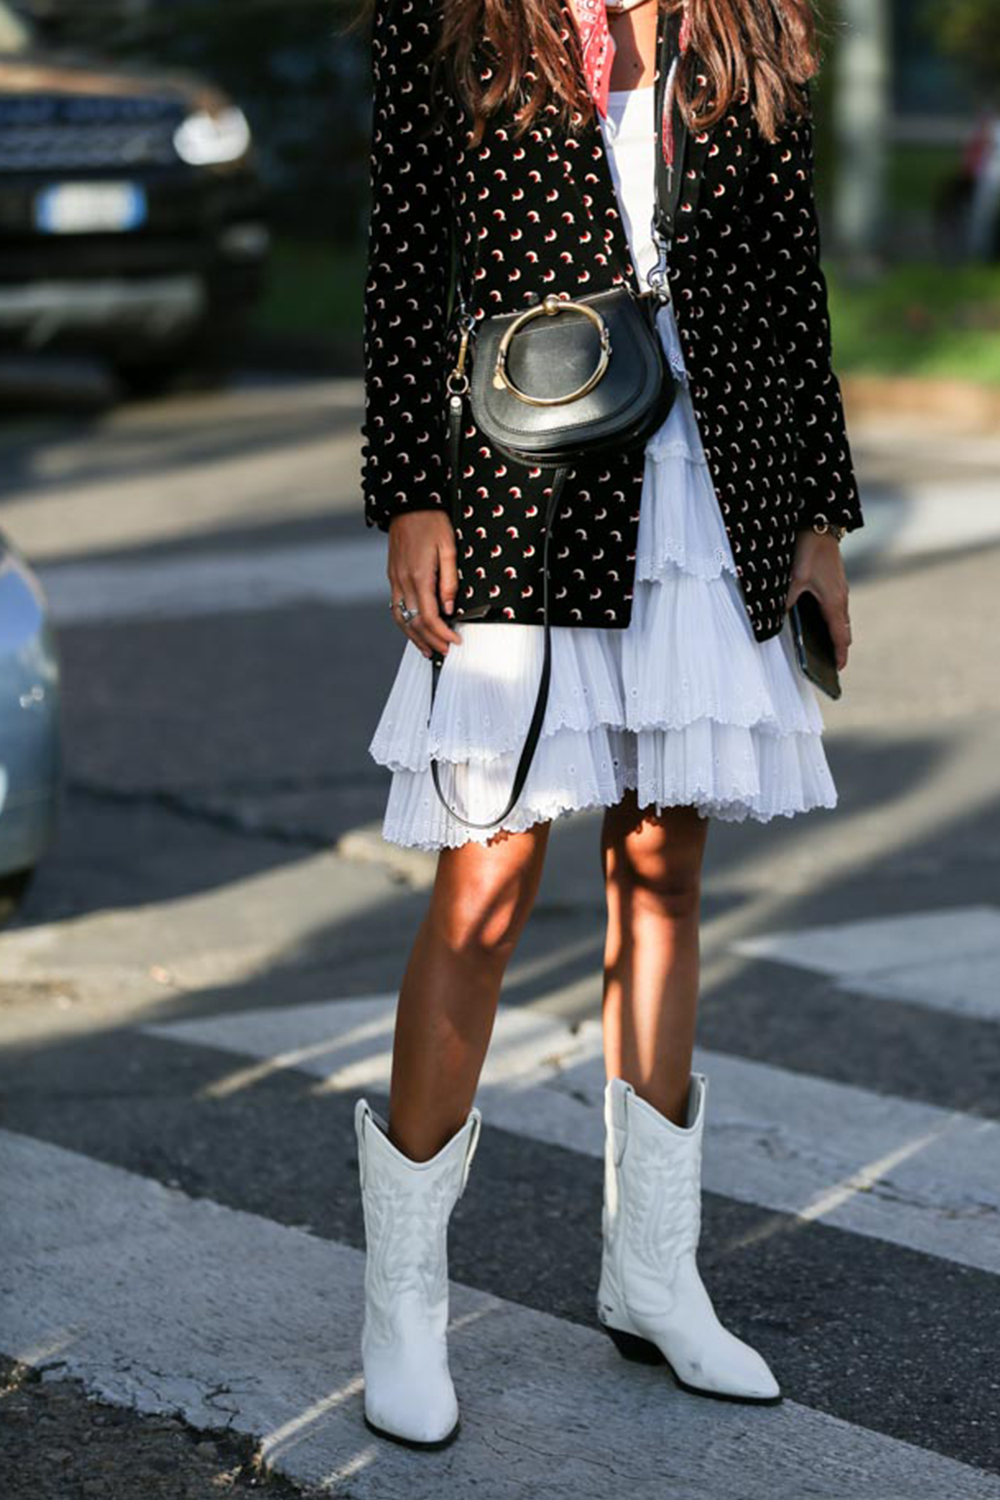 Dresses With Boots: Formulas That 